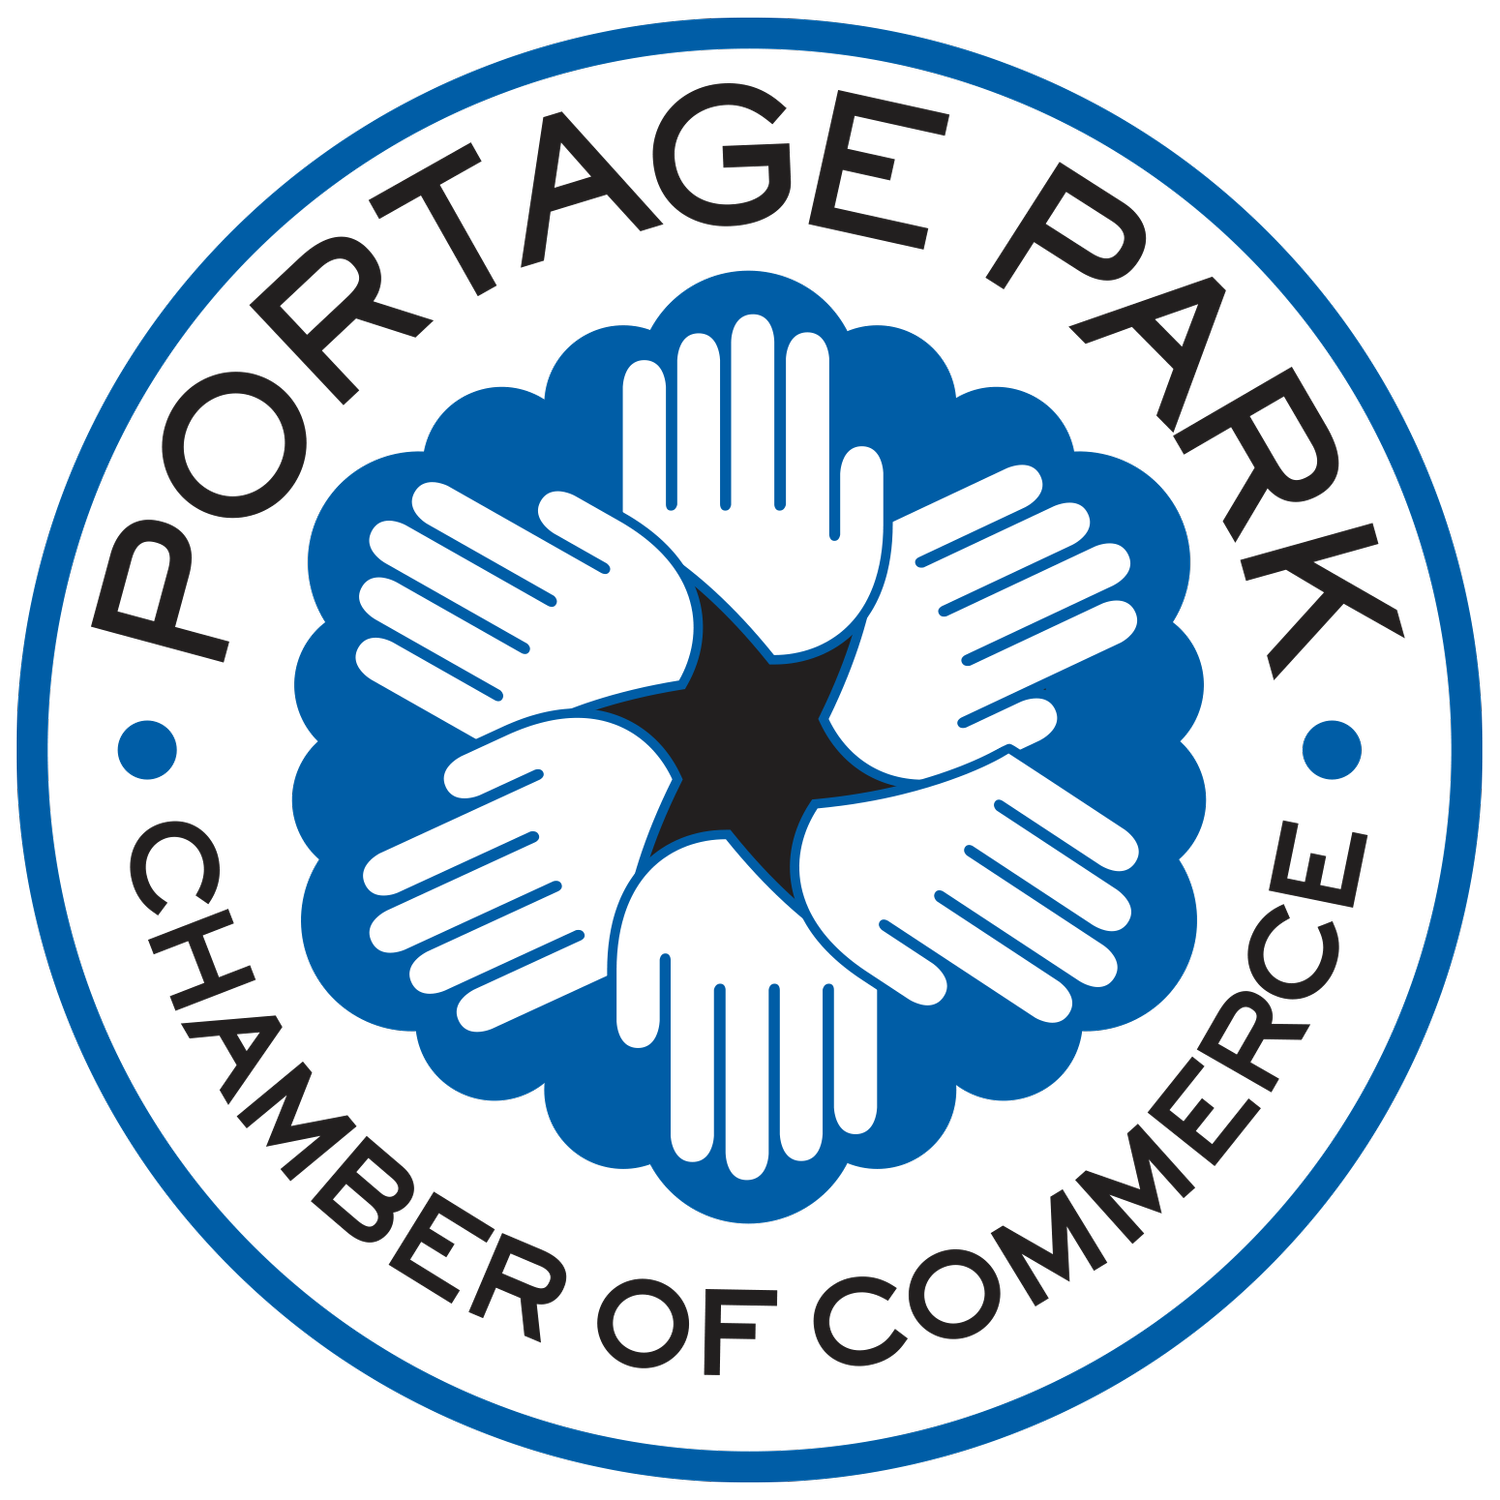 Portage Park Chamber of Commerce